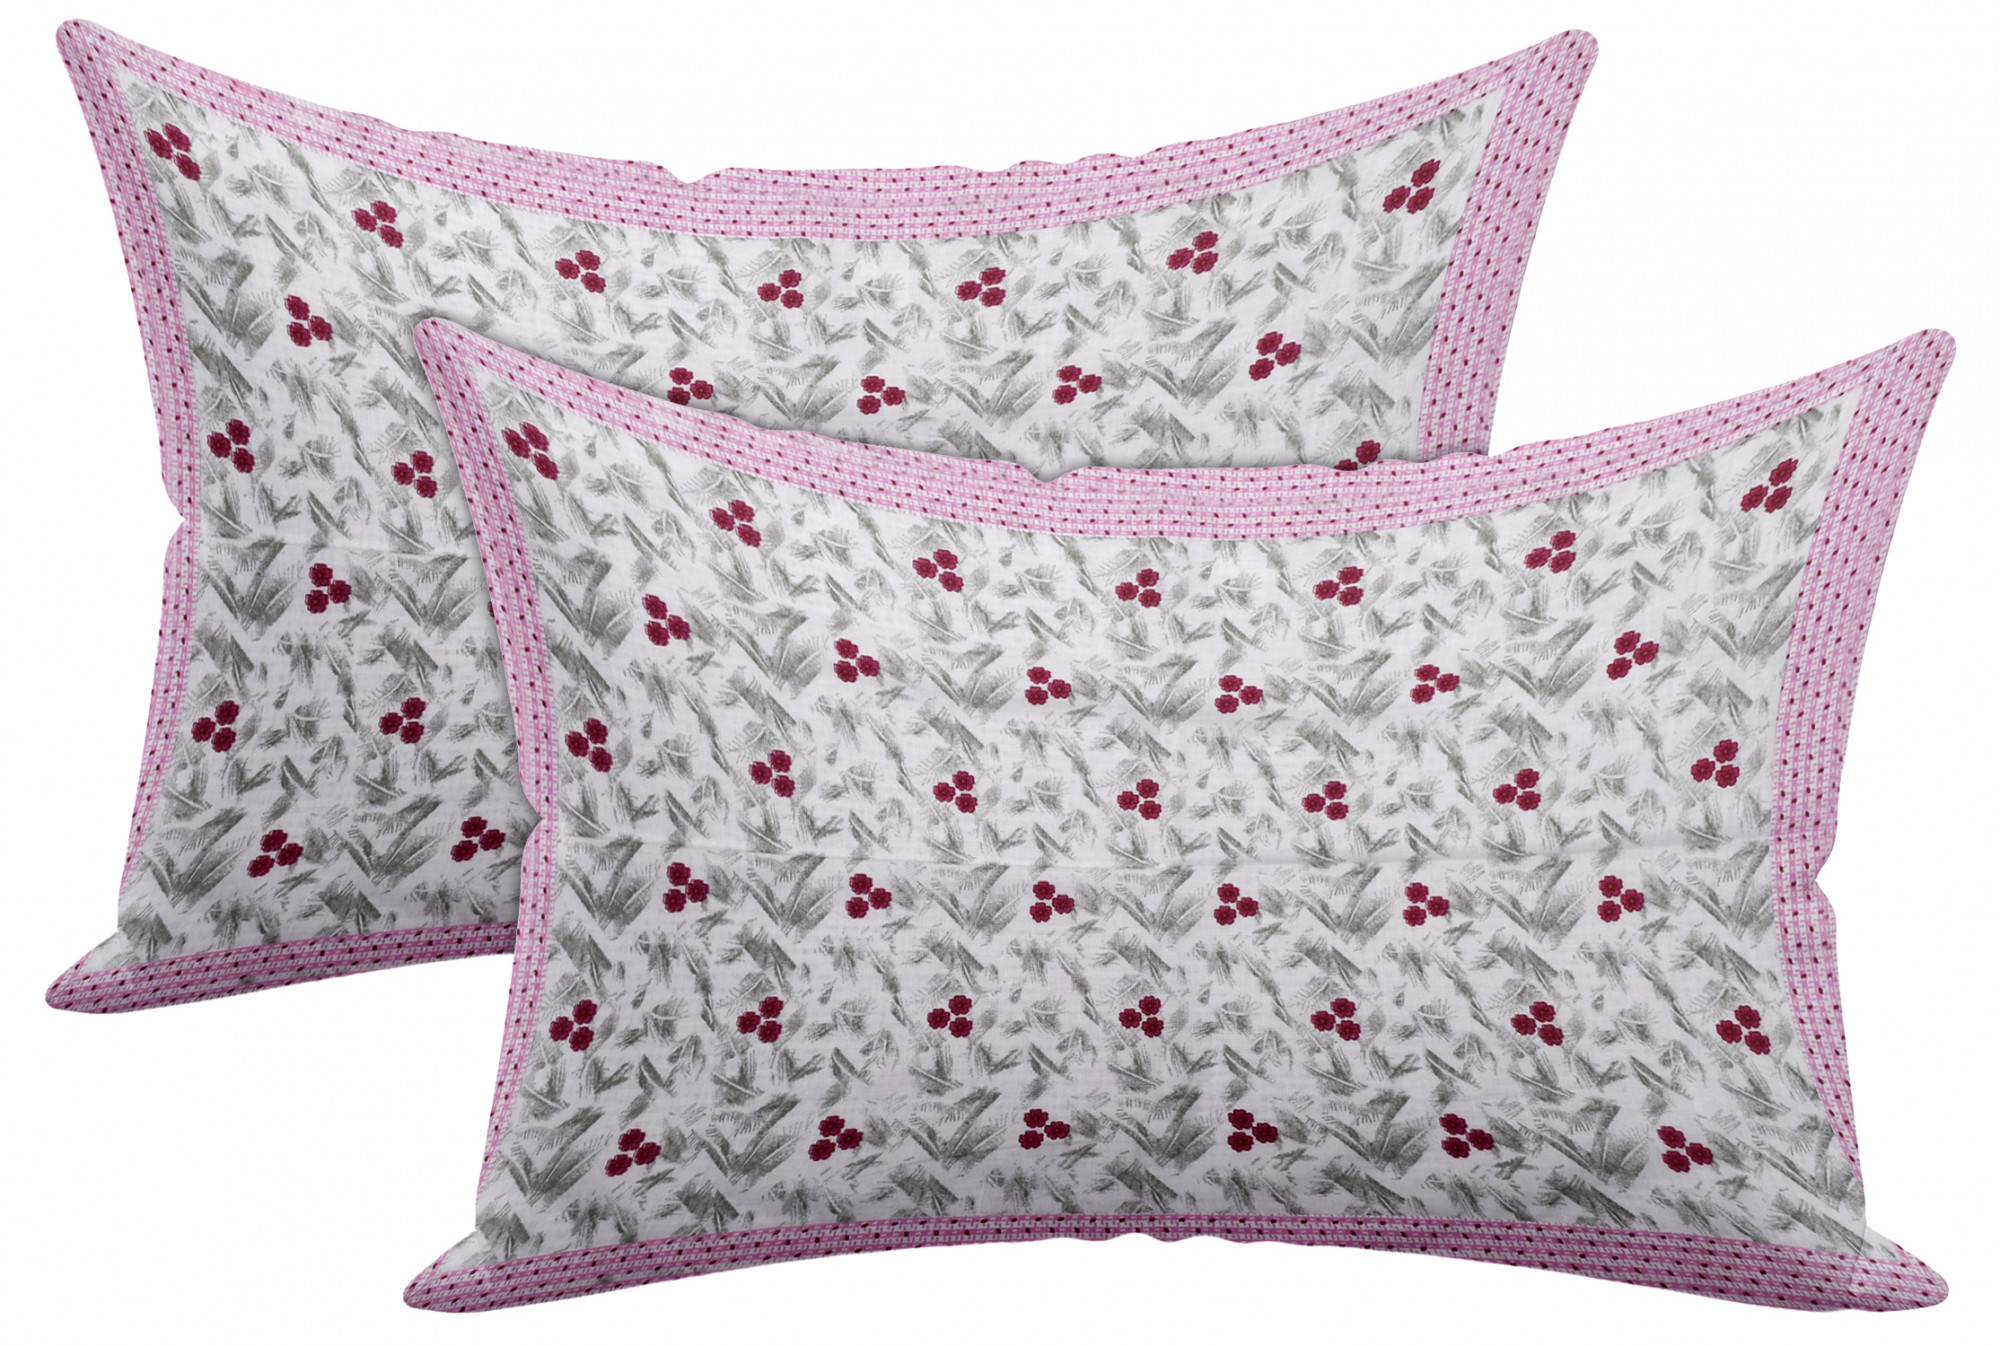 Kuber Industries Floral Design Premium Cotton Pillow Covers, 18 x 28 inch,(Pink)